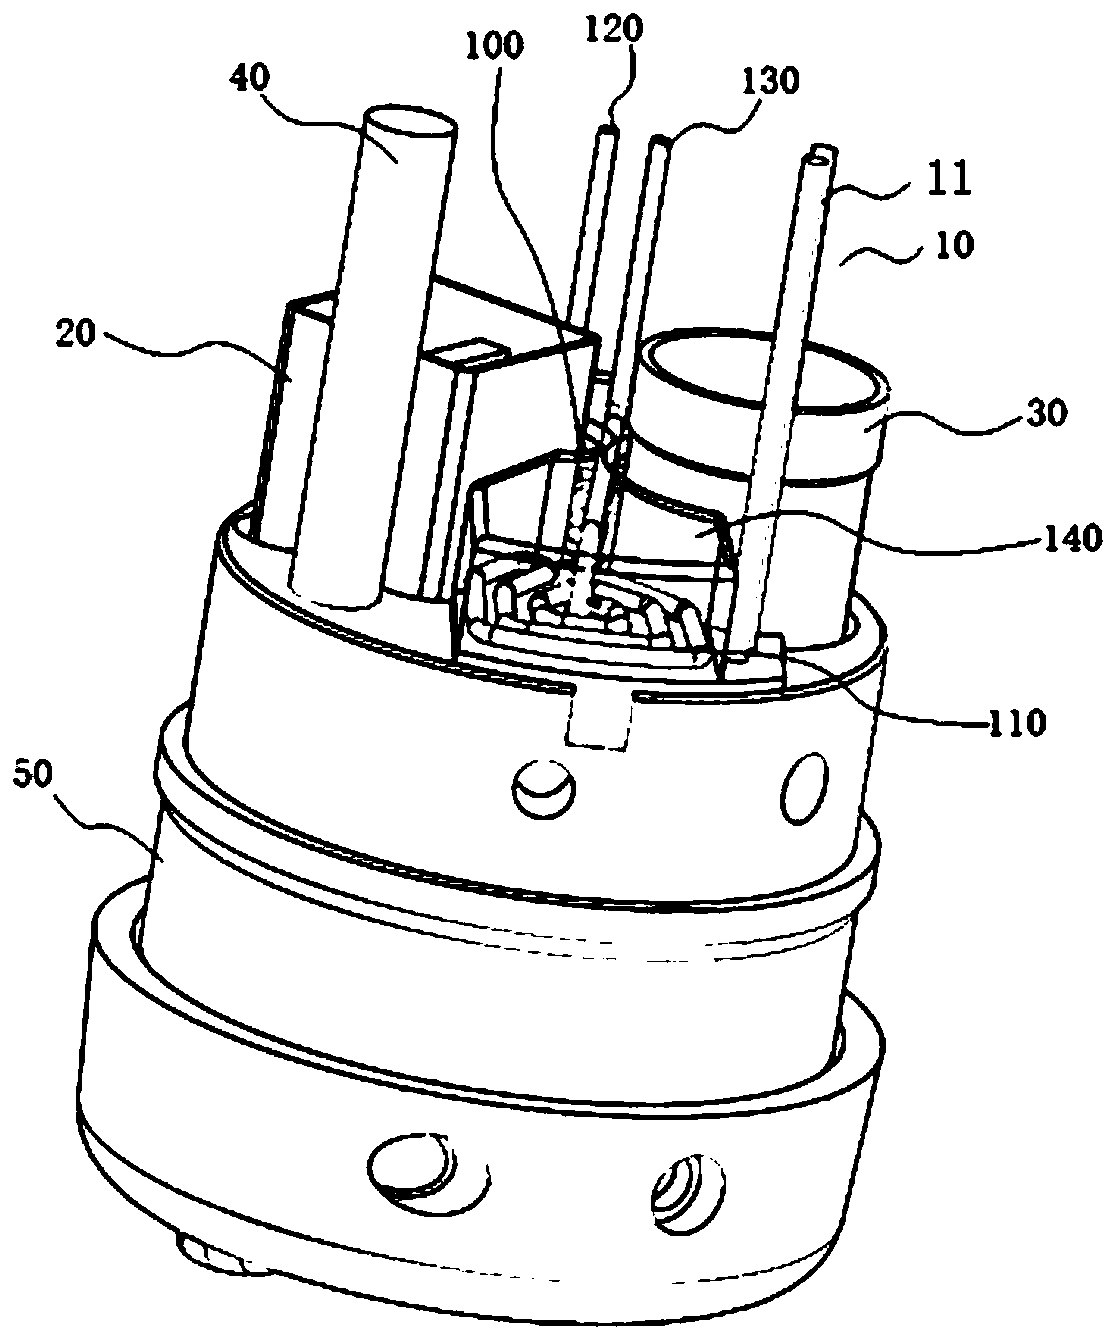 A cooling system for endoscope illumination and an endoscope